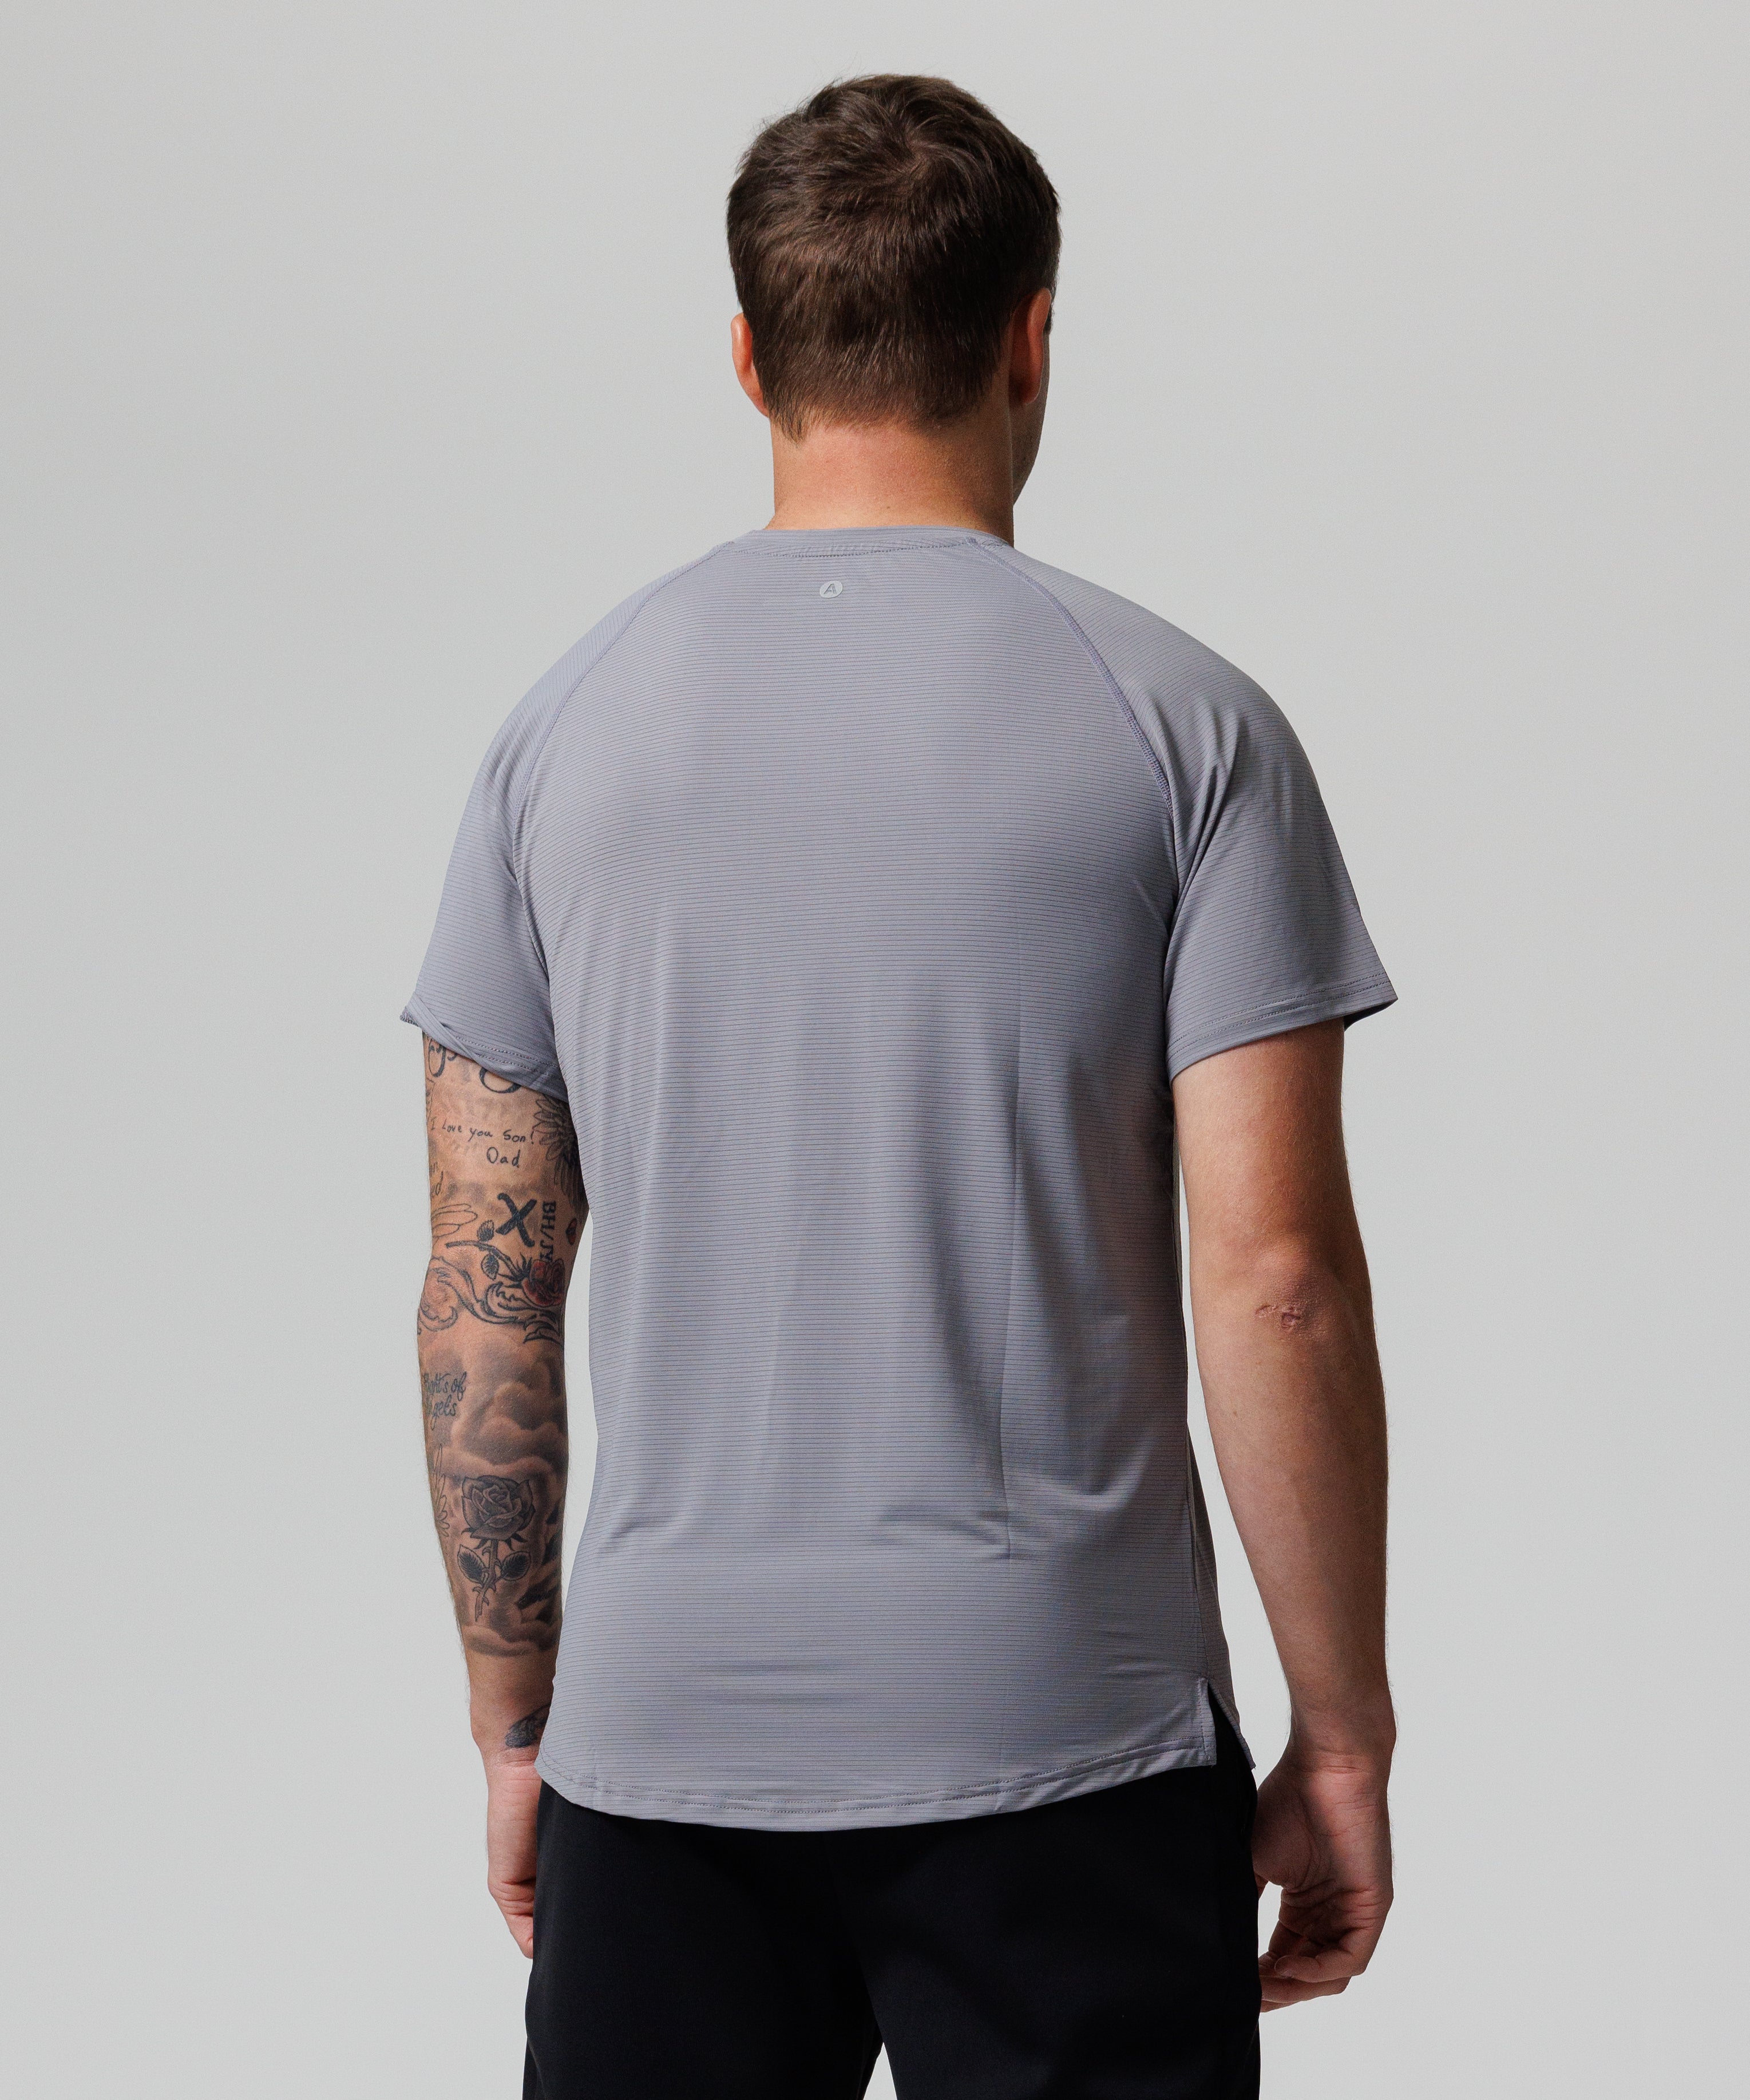 New Arrivals | Ghostfit Apparel